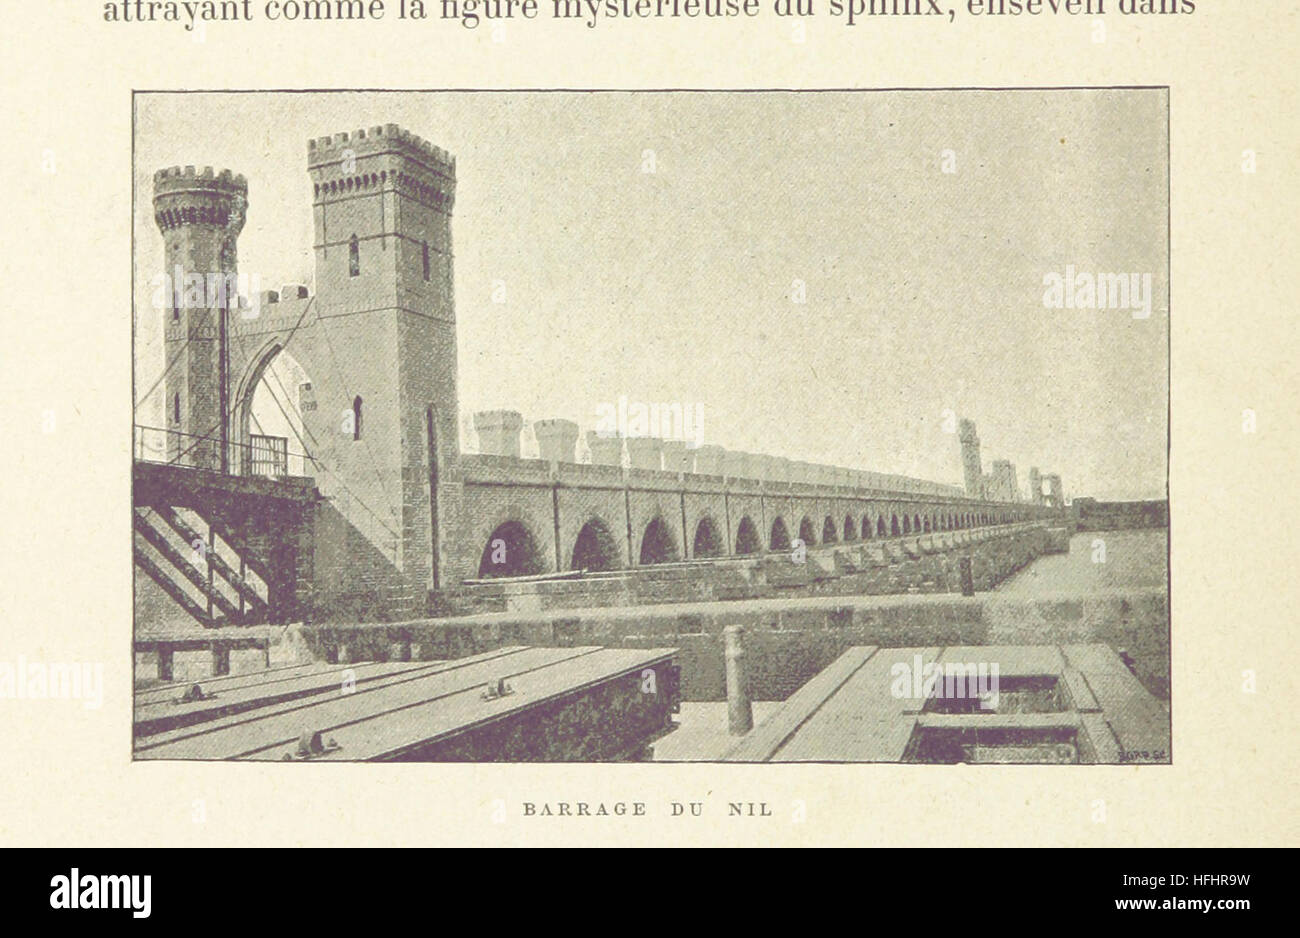 Le Pays des Pharaons. [With illustrations.] Image taken from page 18 of 'Le Pays des Pharaons Stock Photo